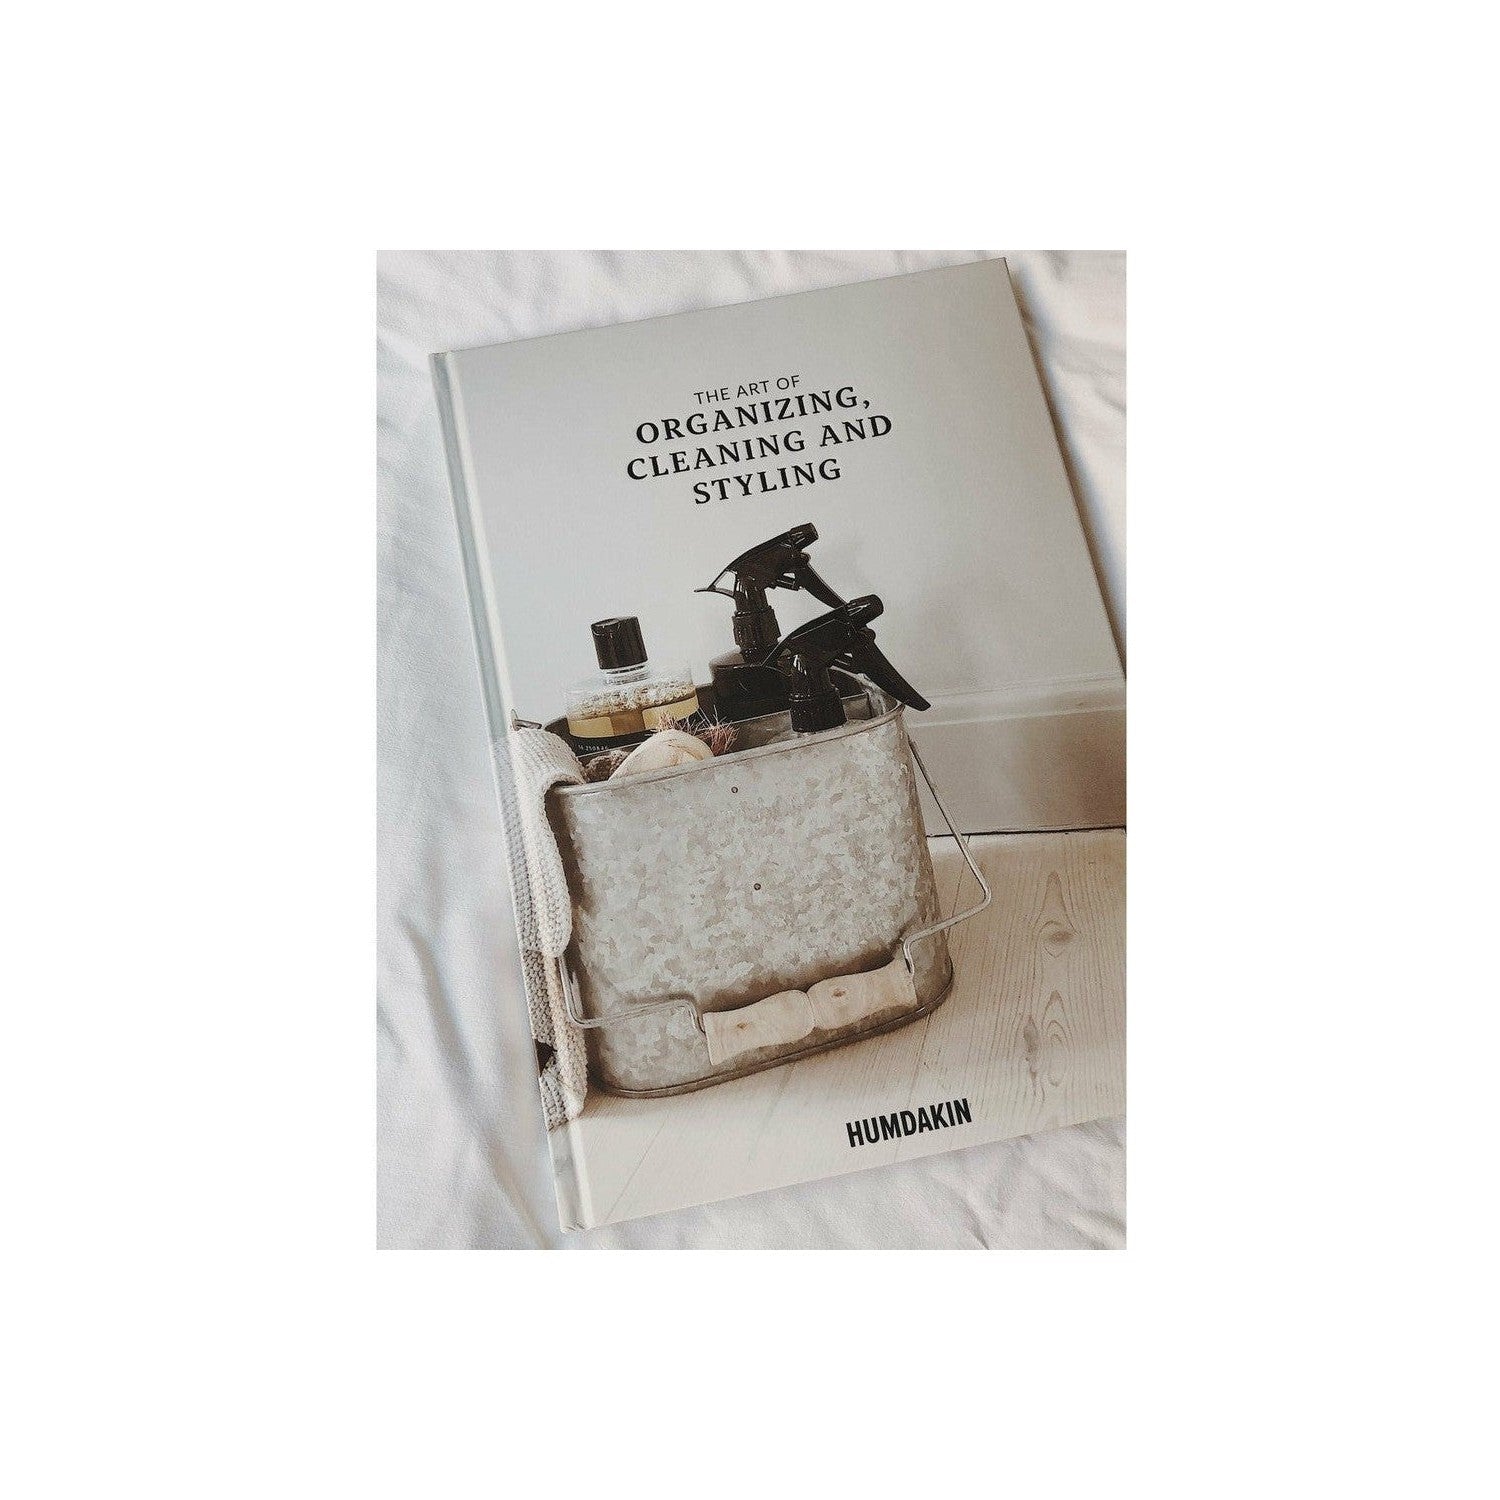 Libro di Humdakin: The Art of Organizing, Cleaning and Styling